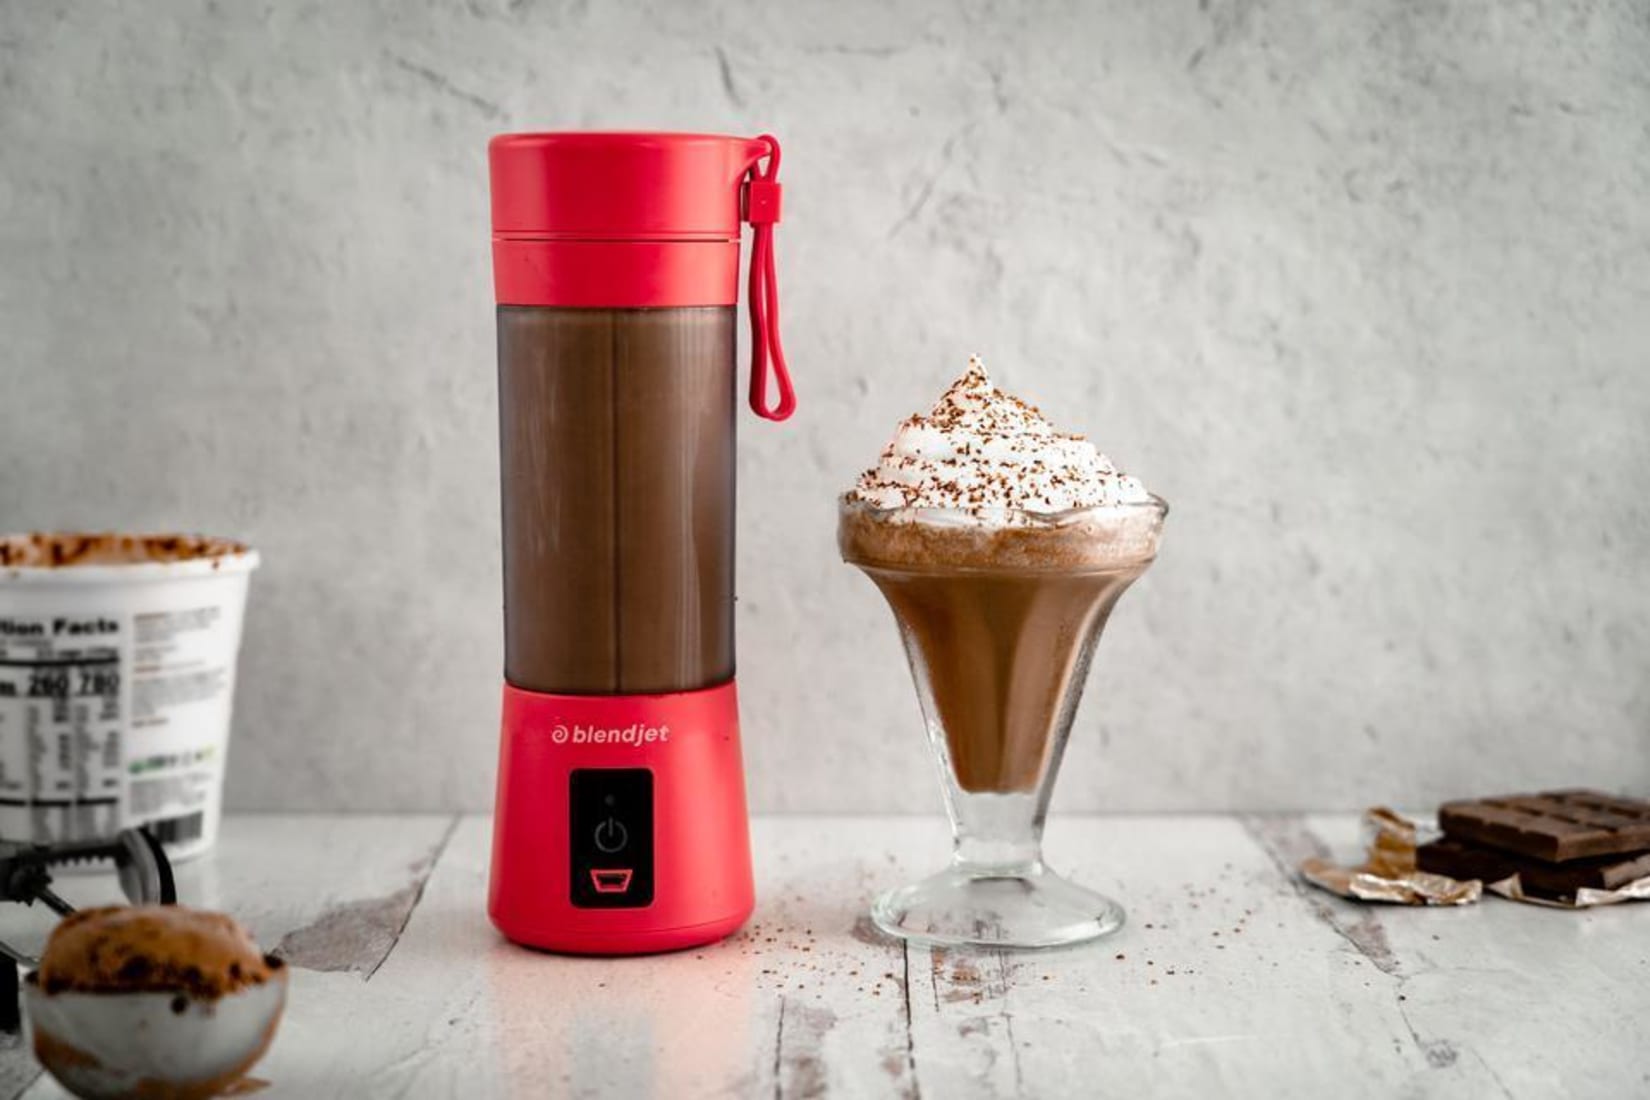 Red BlendJet on a counter next to a chocolate shake and surrounded by chocolate and cocoa powder